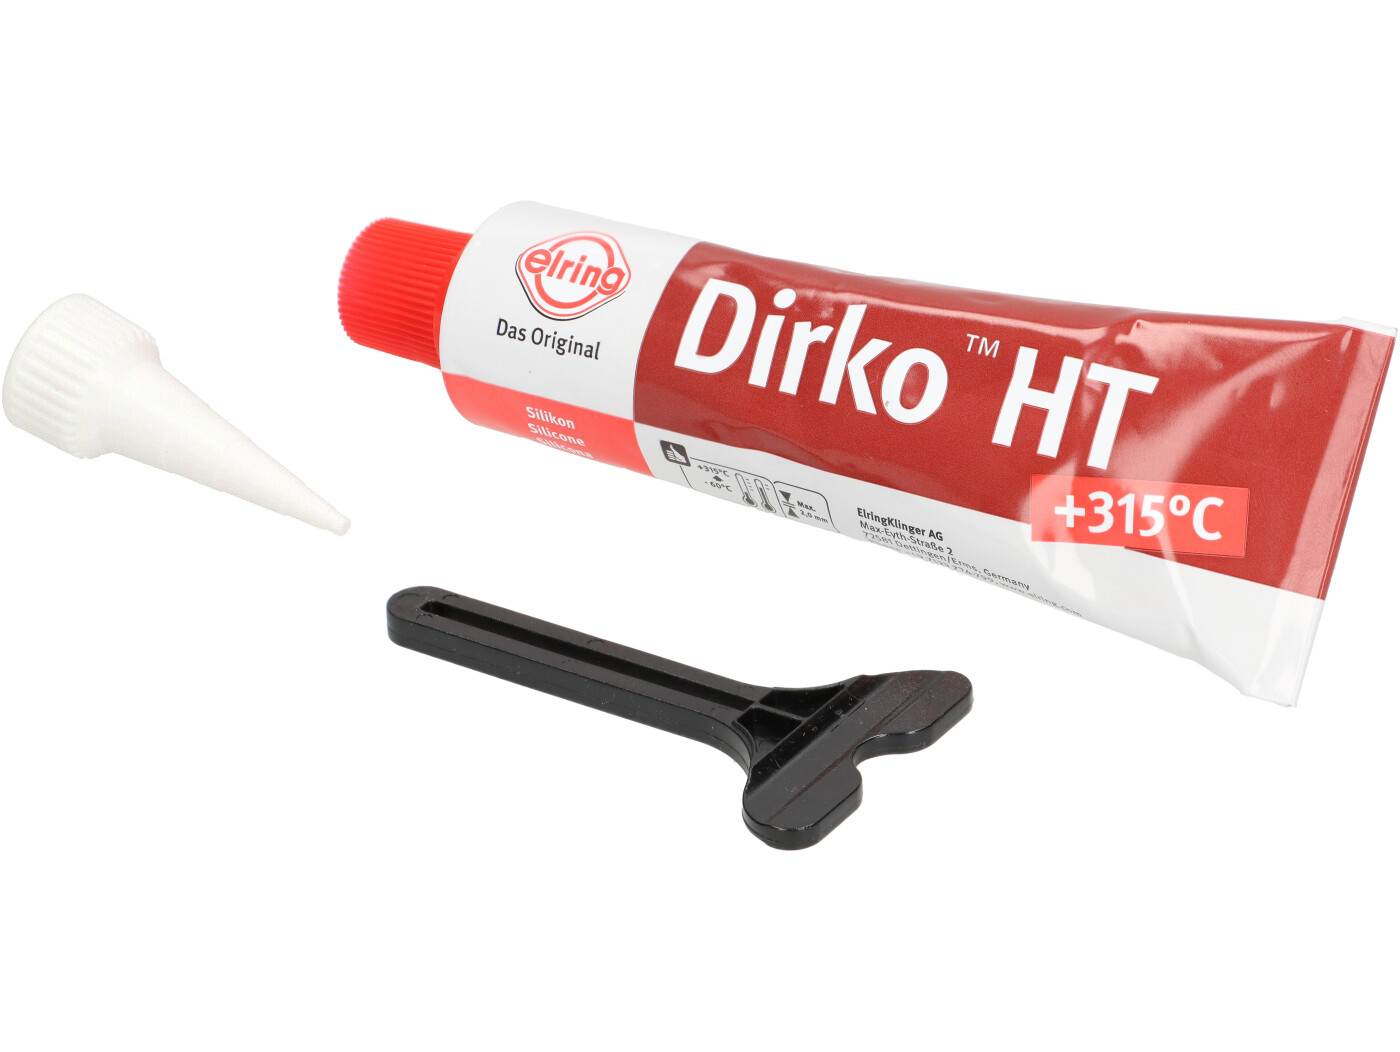 2x Sealant Dirko HT Beige Special Silicone A 70ml 030.793 Durable